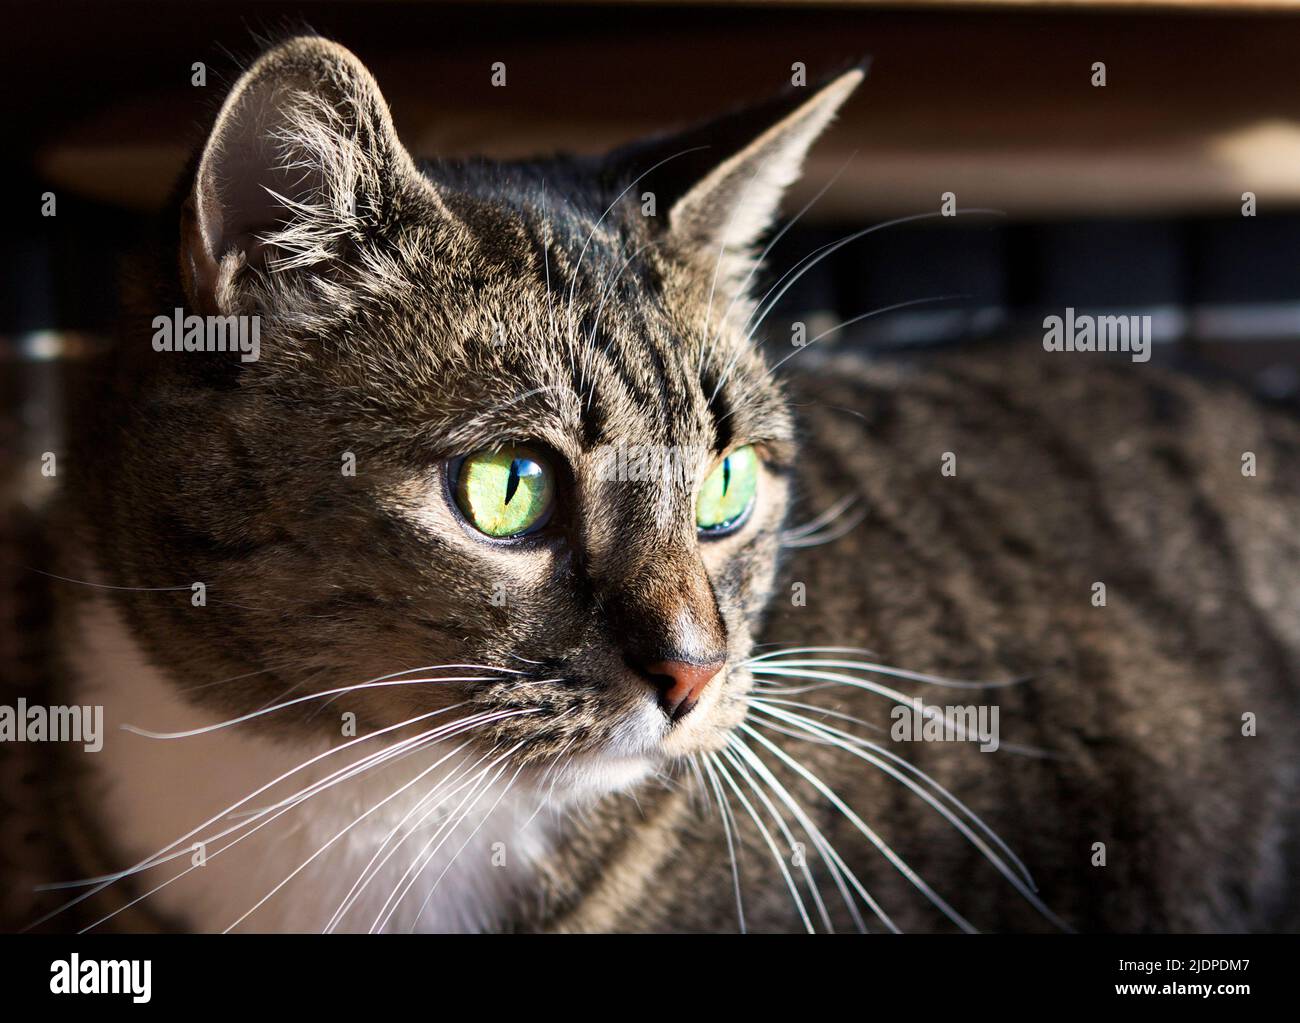 Closeup image of a male brown tabby cat with bright green eyes and white whiskers. Stock Photo